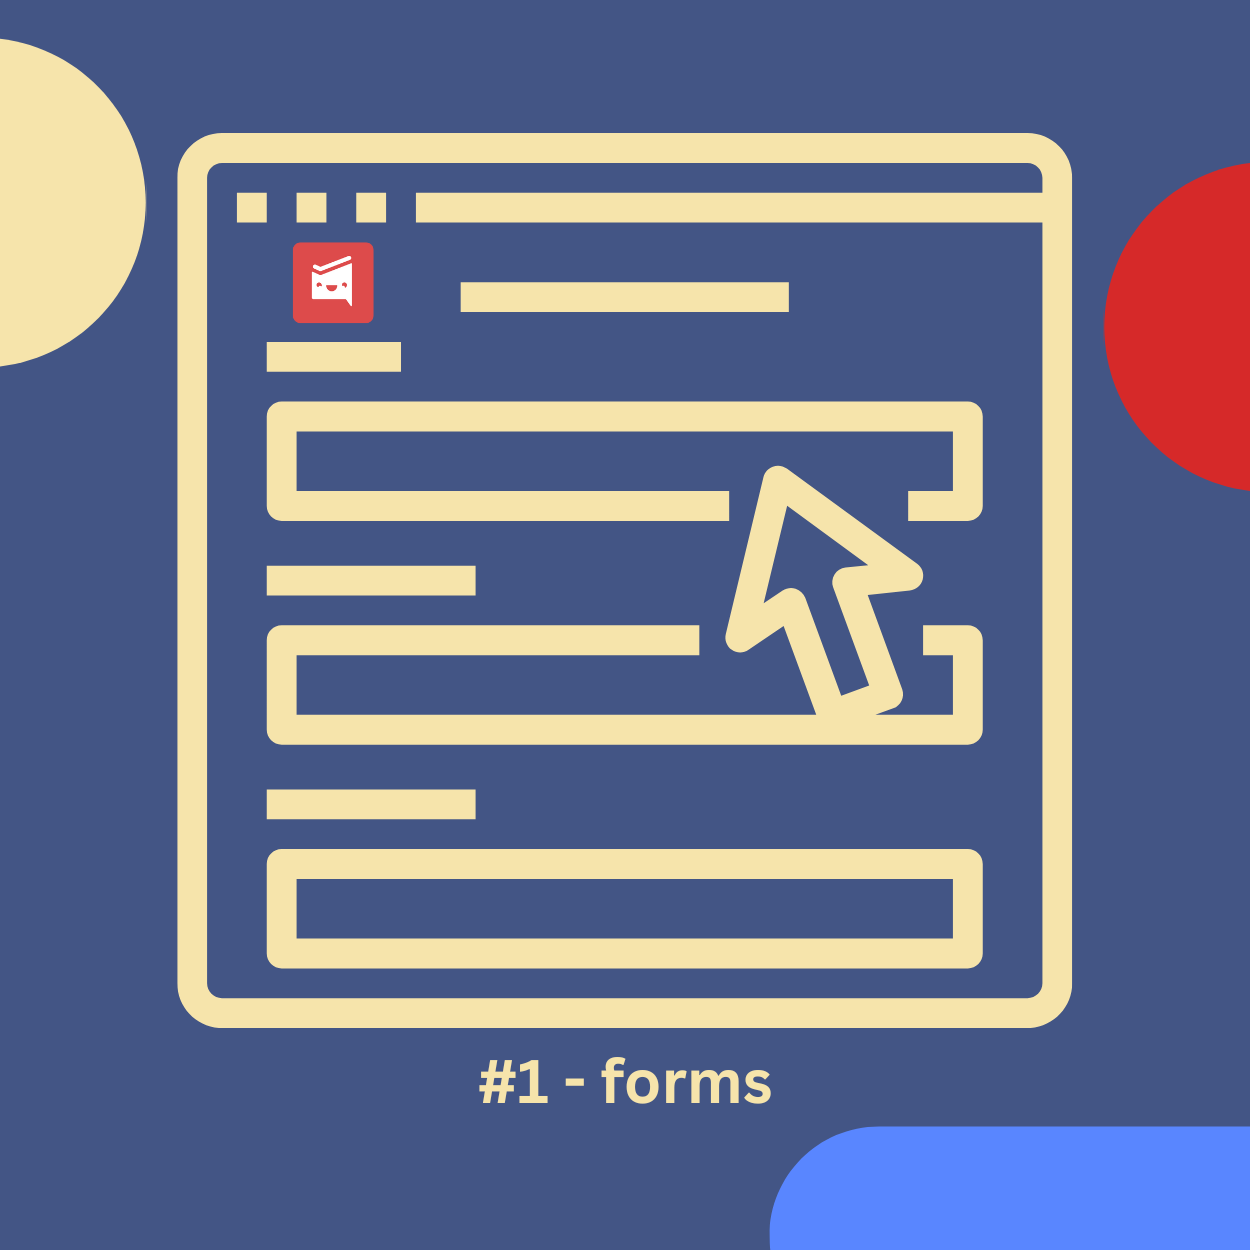 #1 - forms